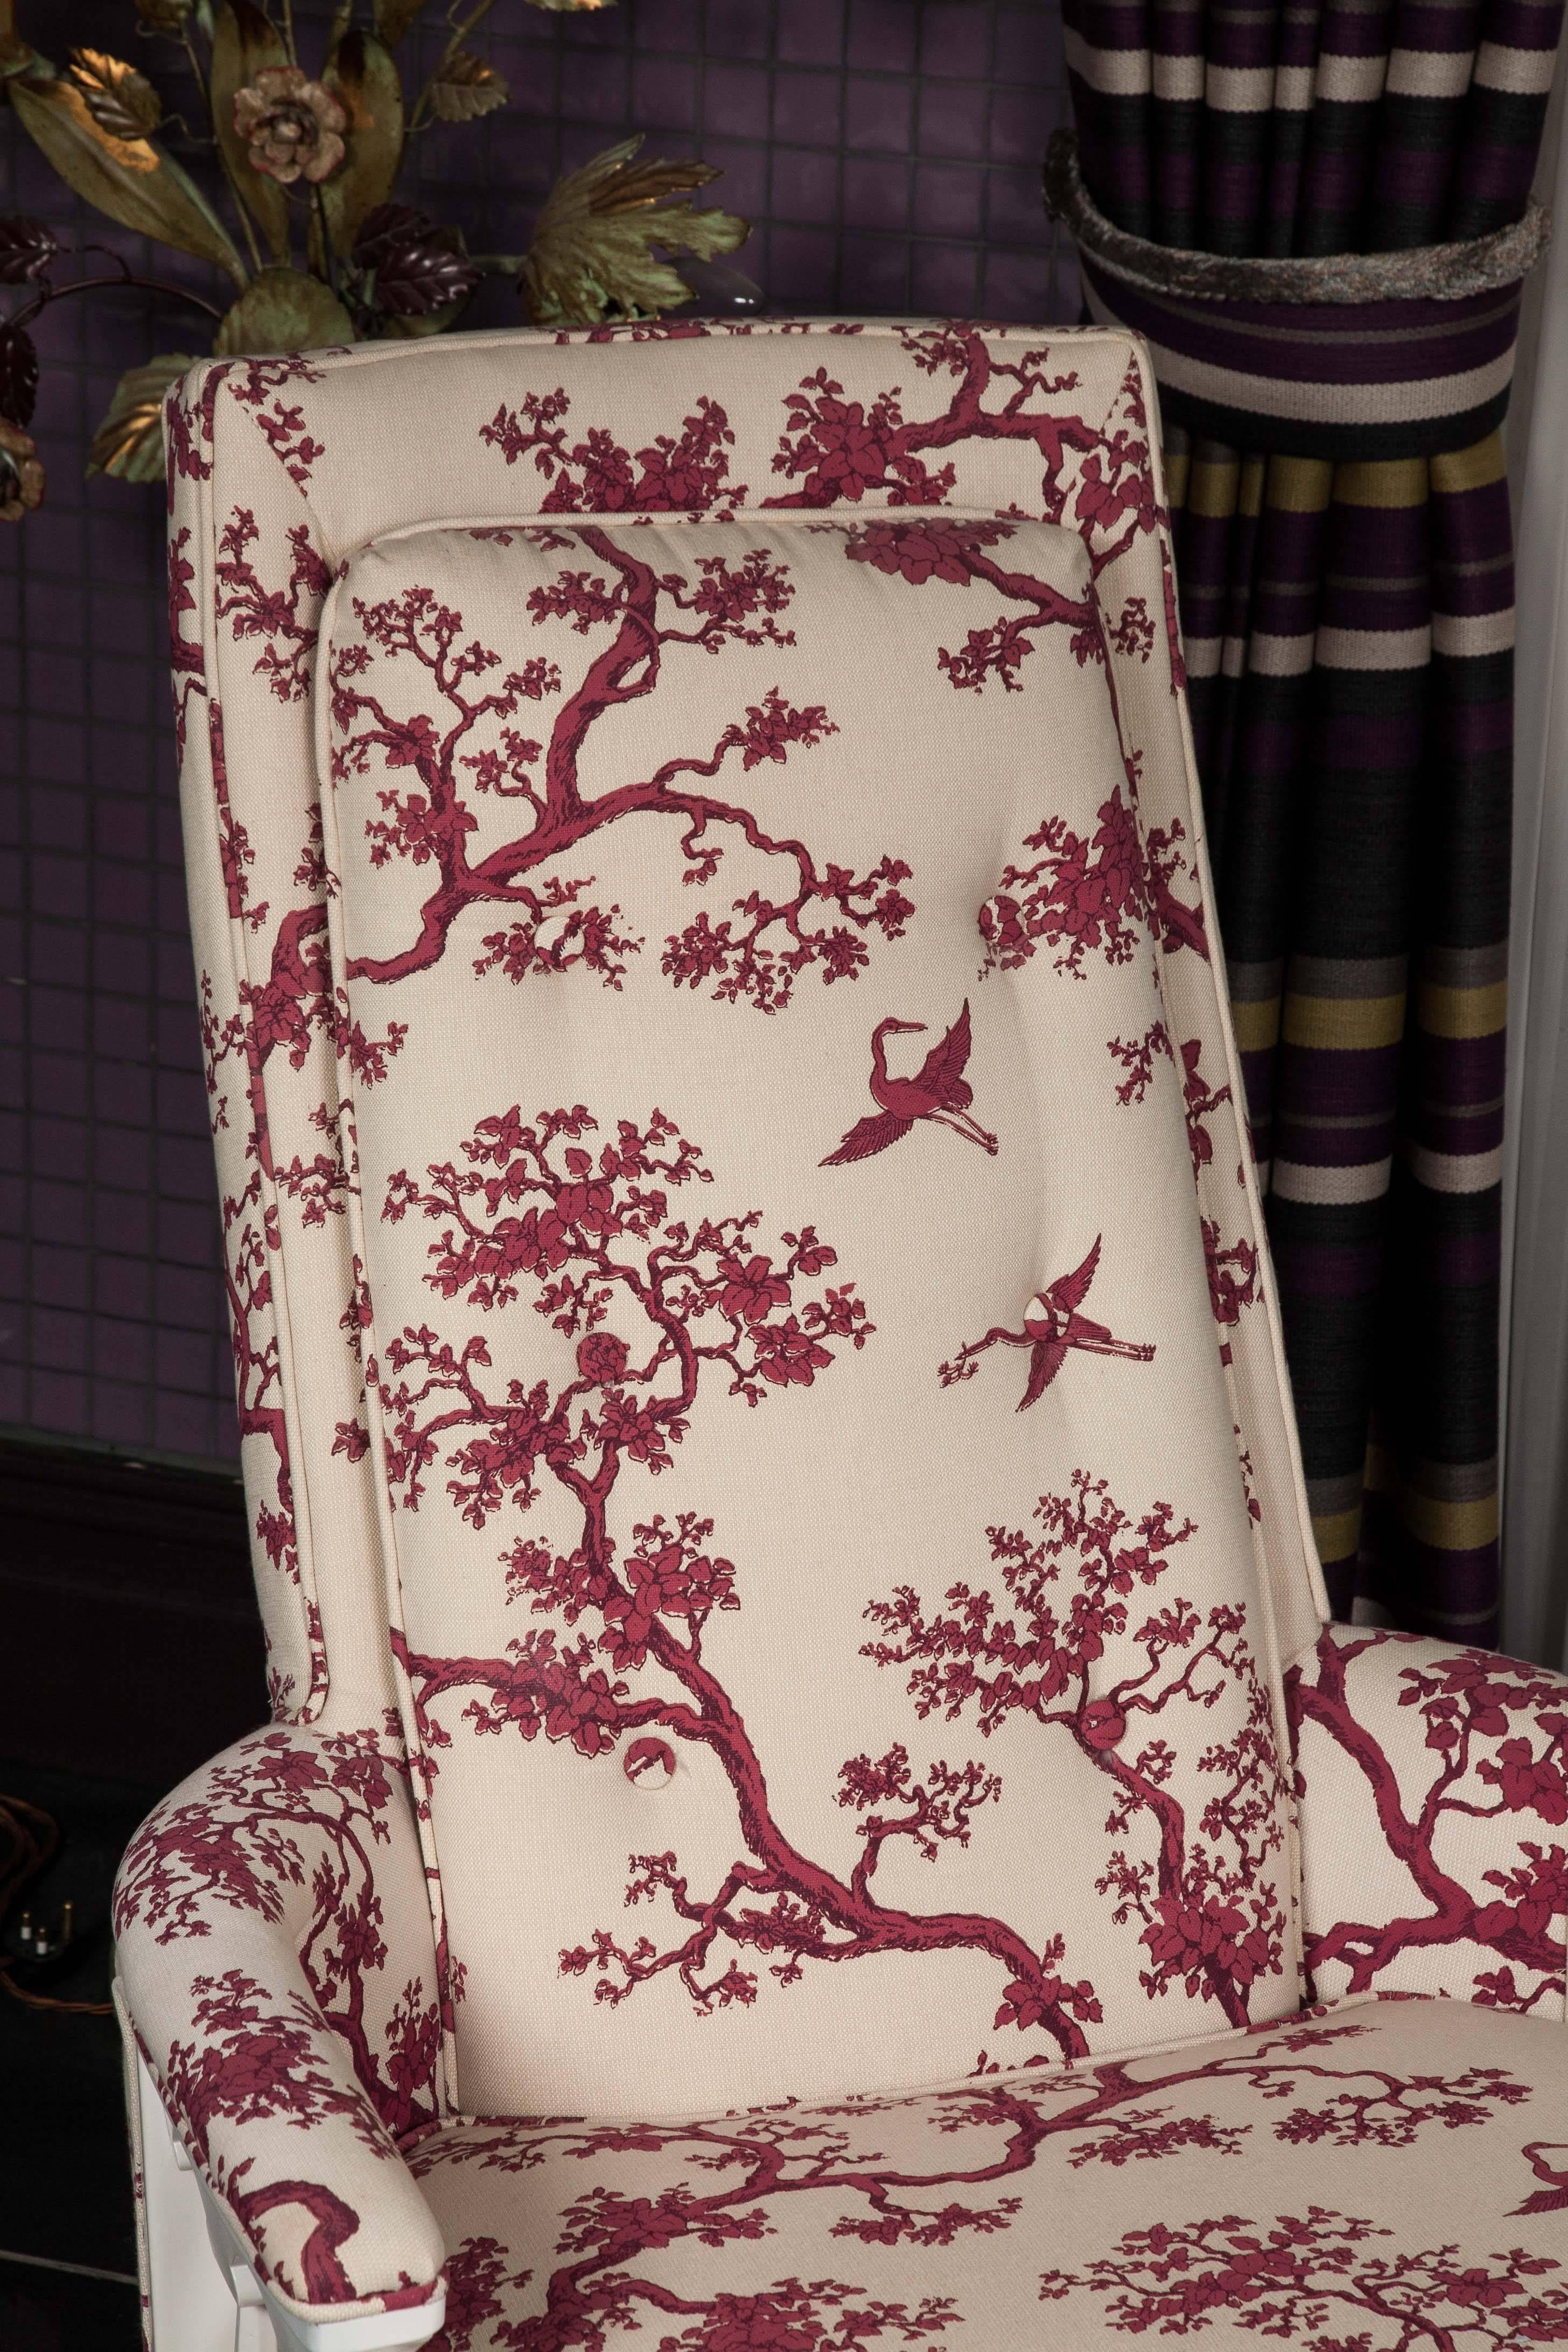 Vintage chair re-invented with traditional delicately patterned fabric and sprayed white wooden frame.